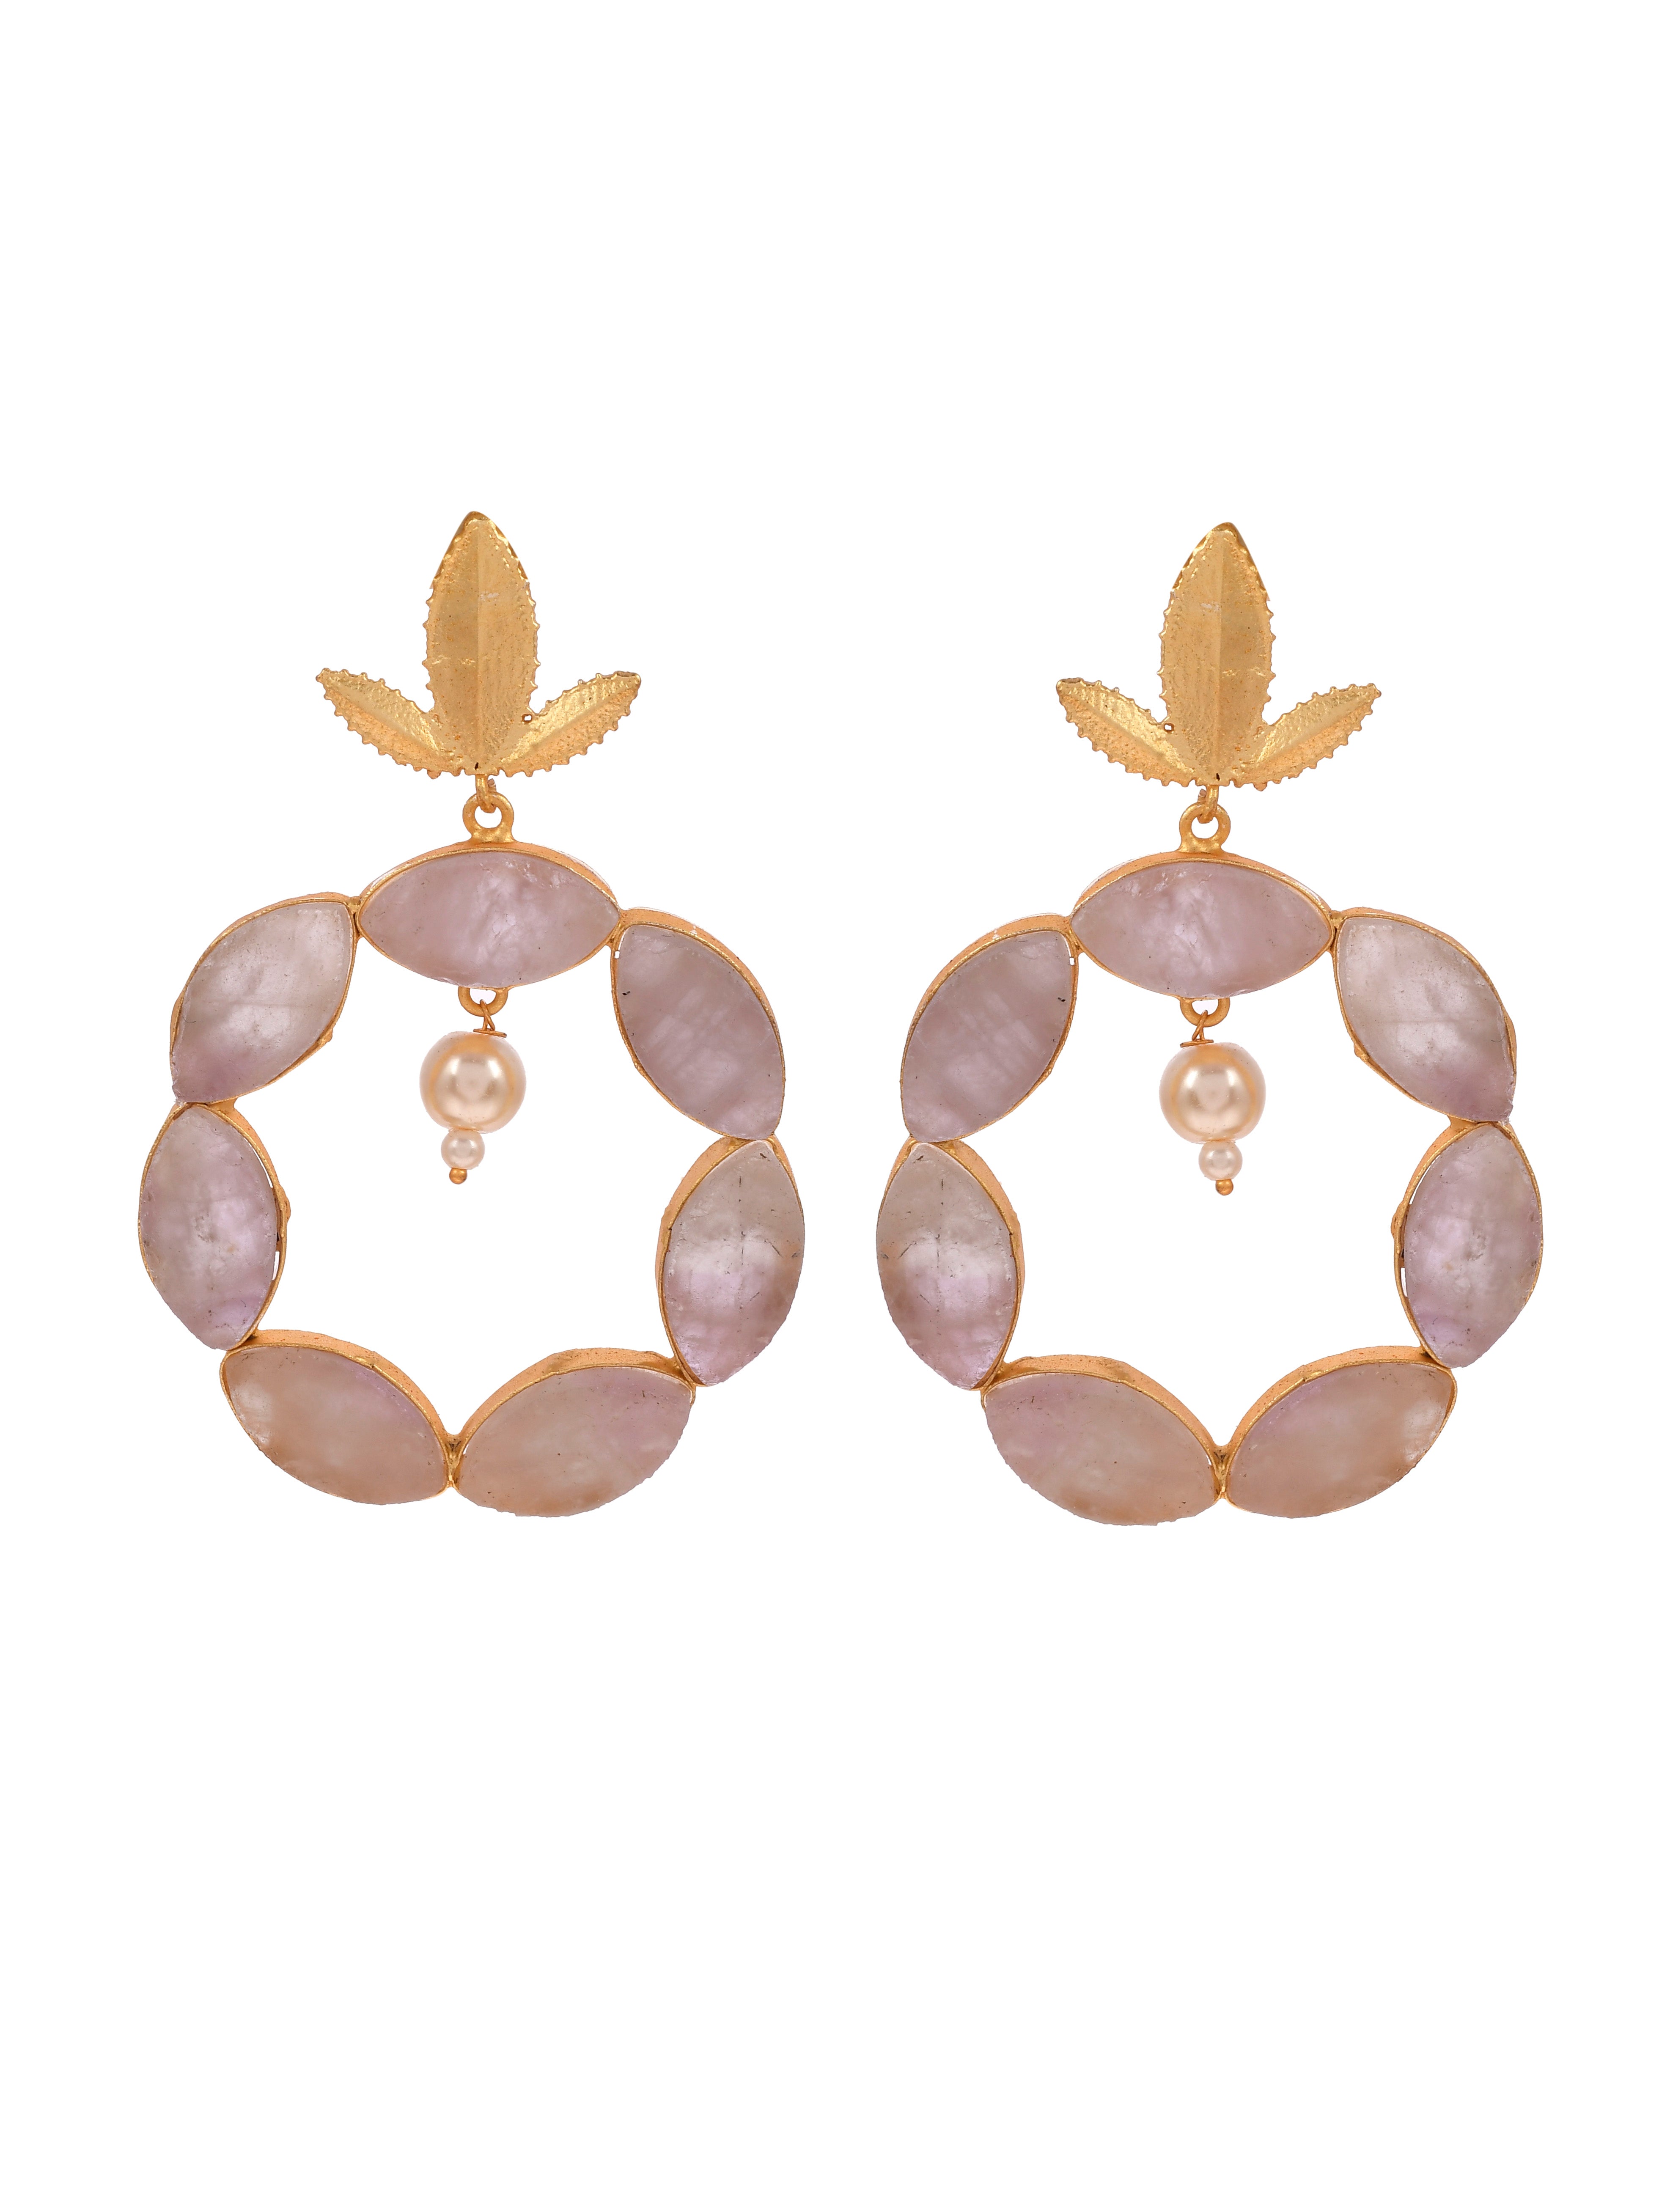 Fancy Gold Earring, Attractive Price, Customized Jewelry Sets, Manufacturer  in Barrackpore, West Bengal